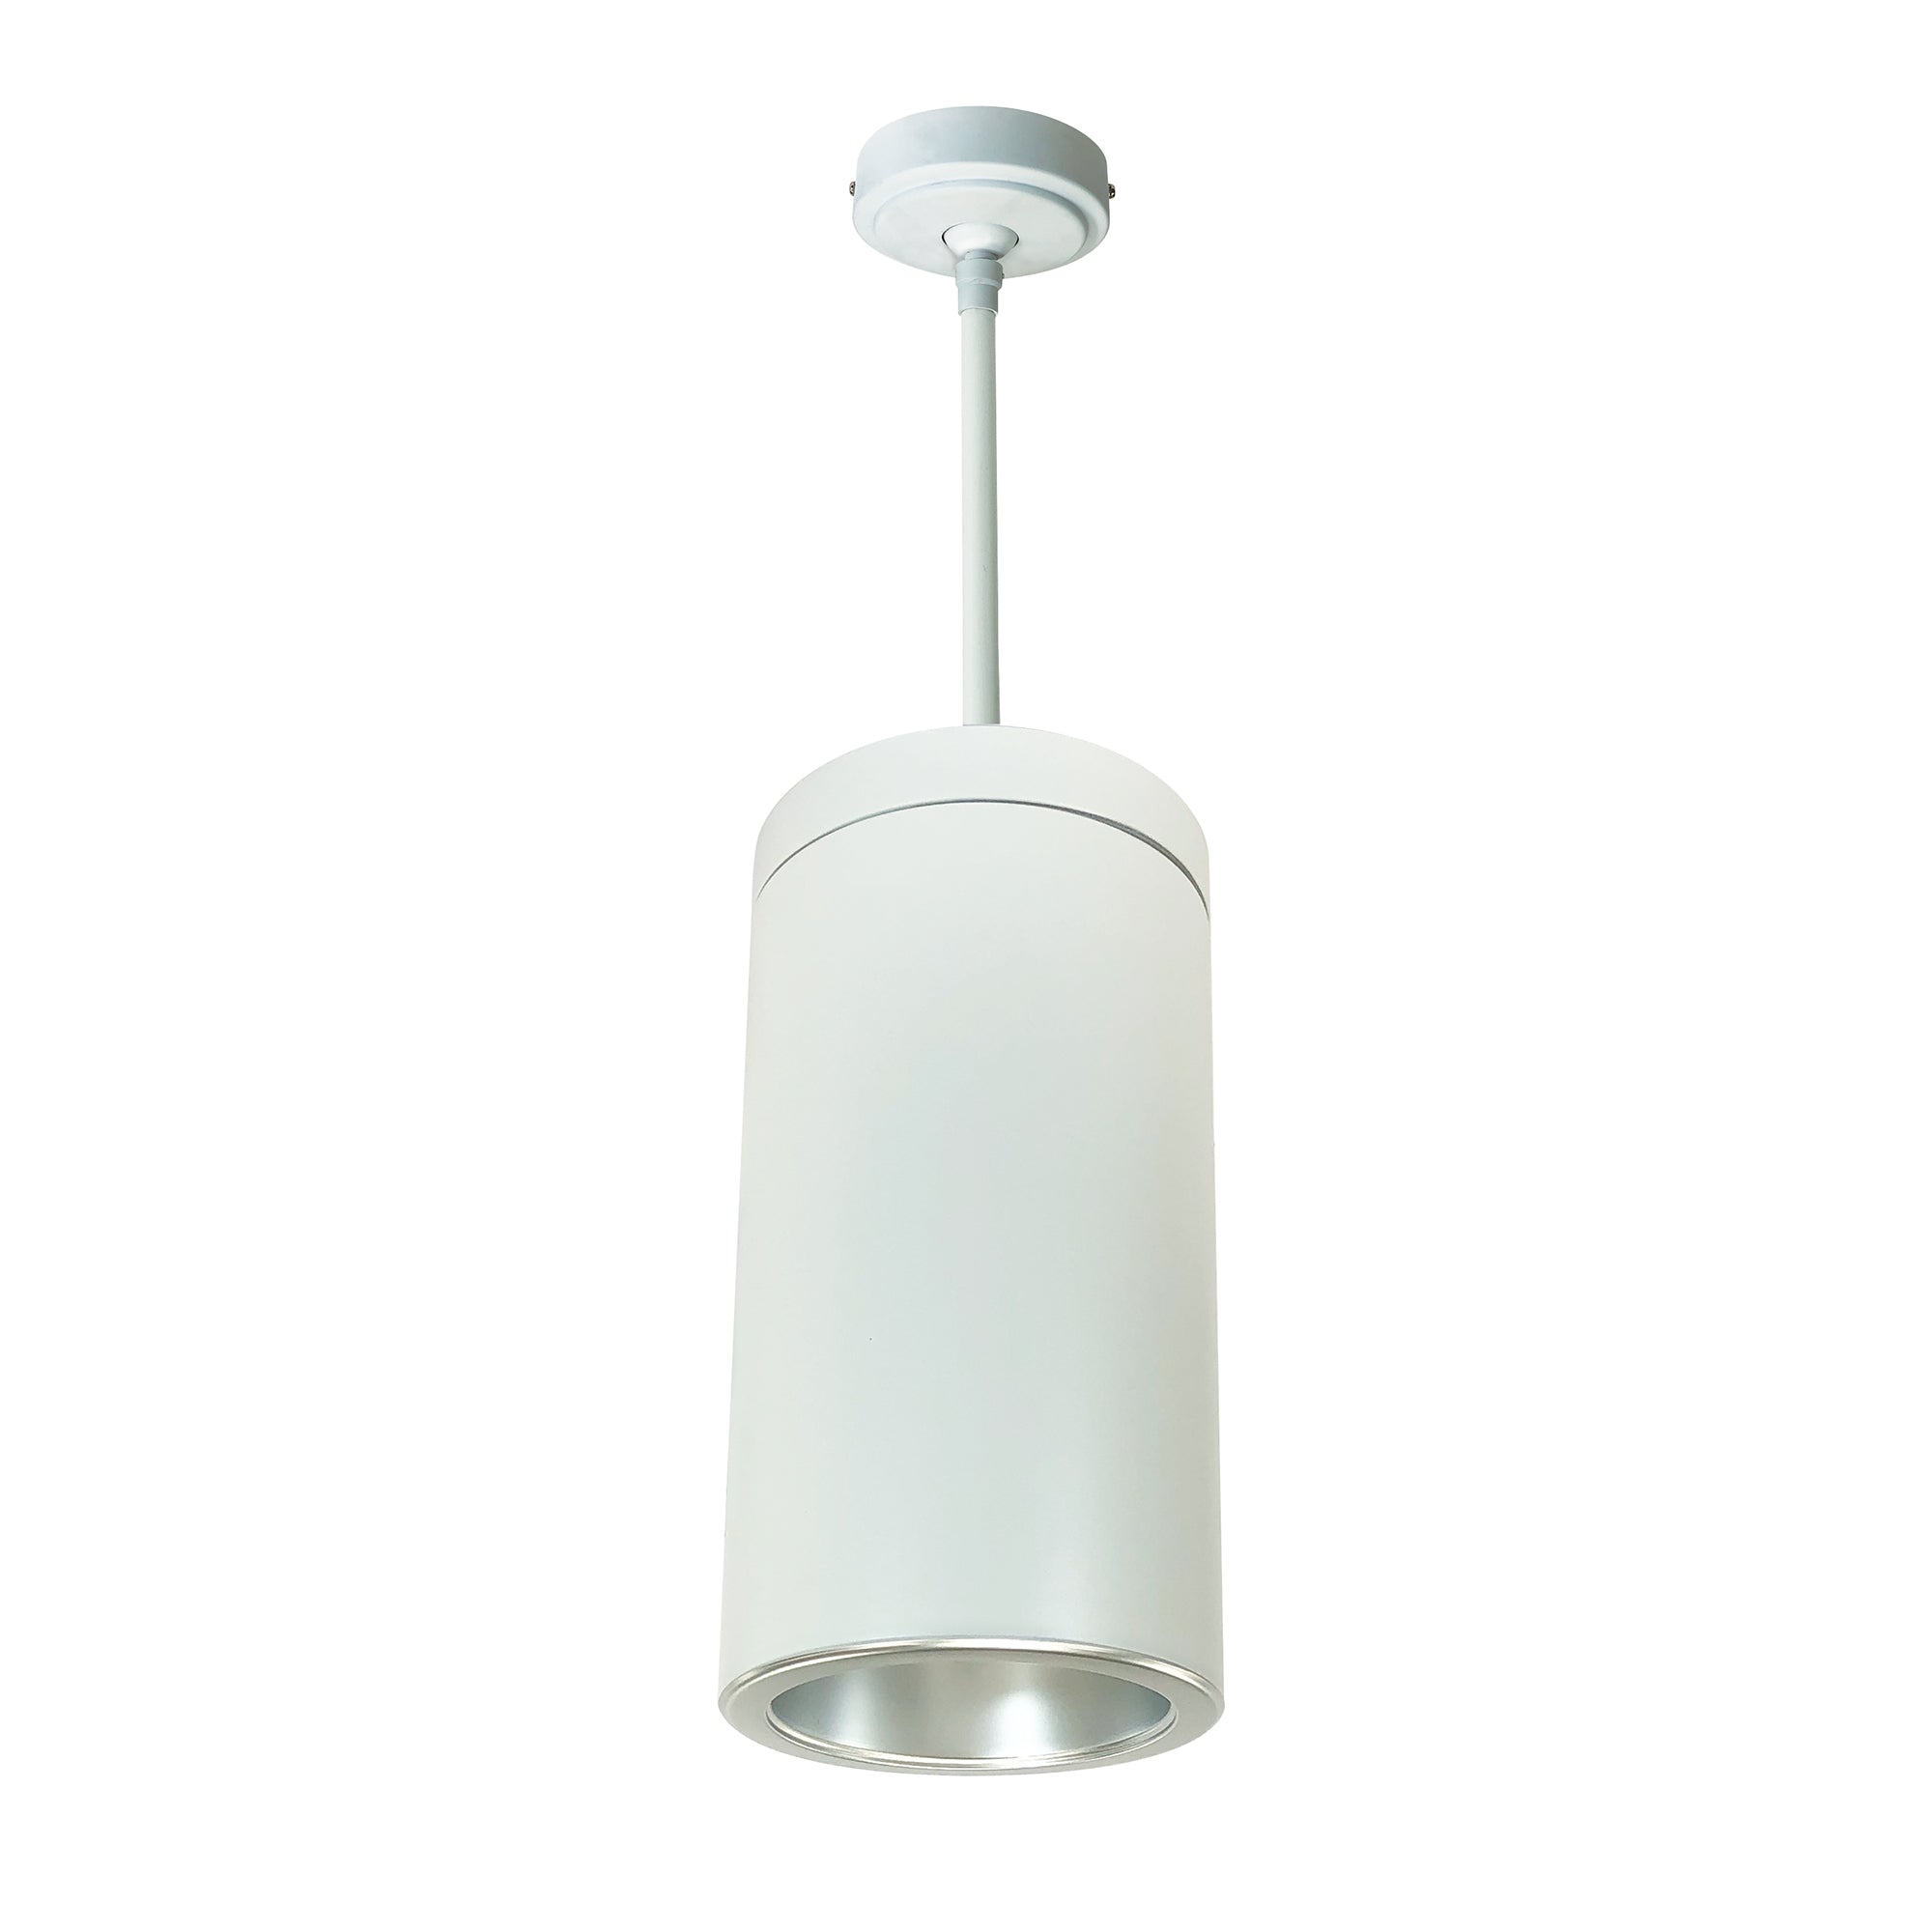 Nora Lighting LE45 - NYLS2-6P15135MDDW6 - Cylinder - White